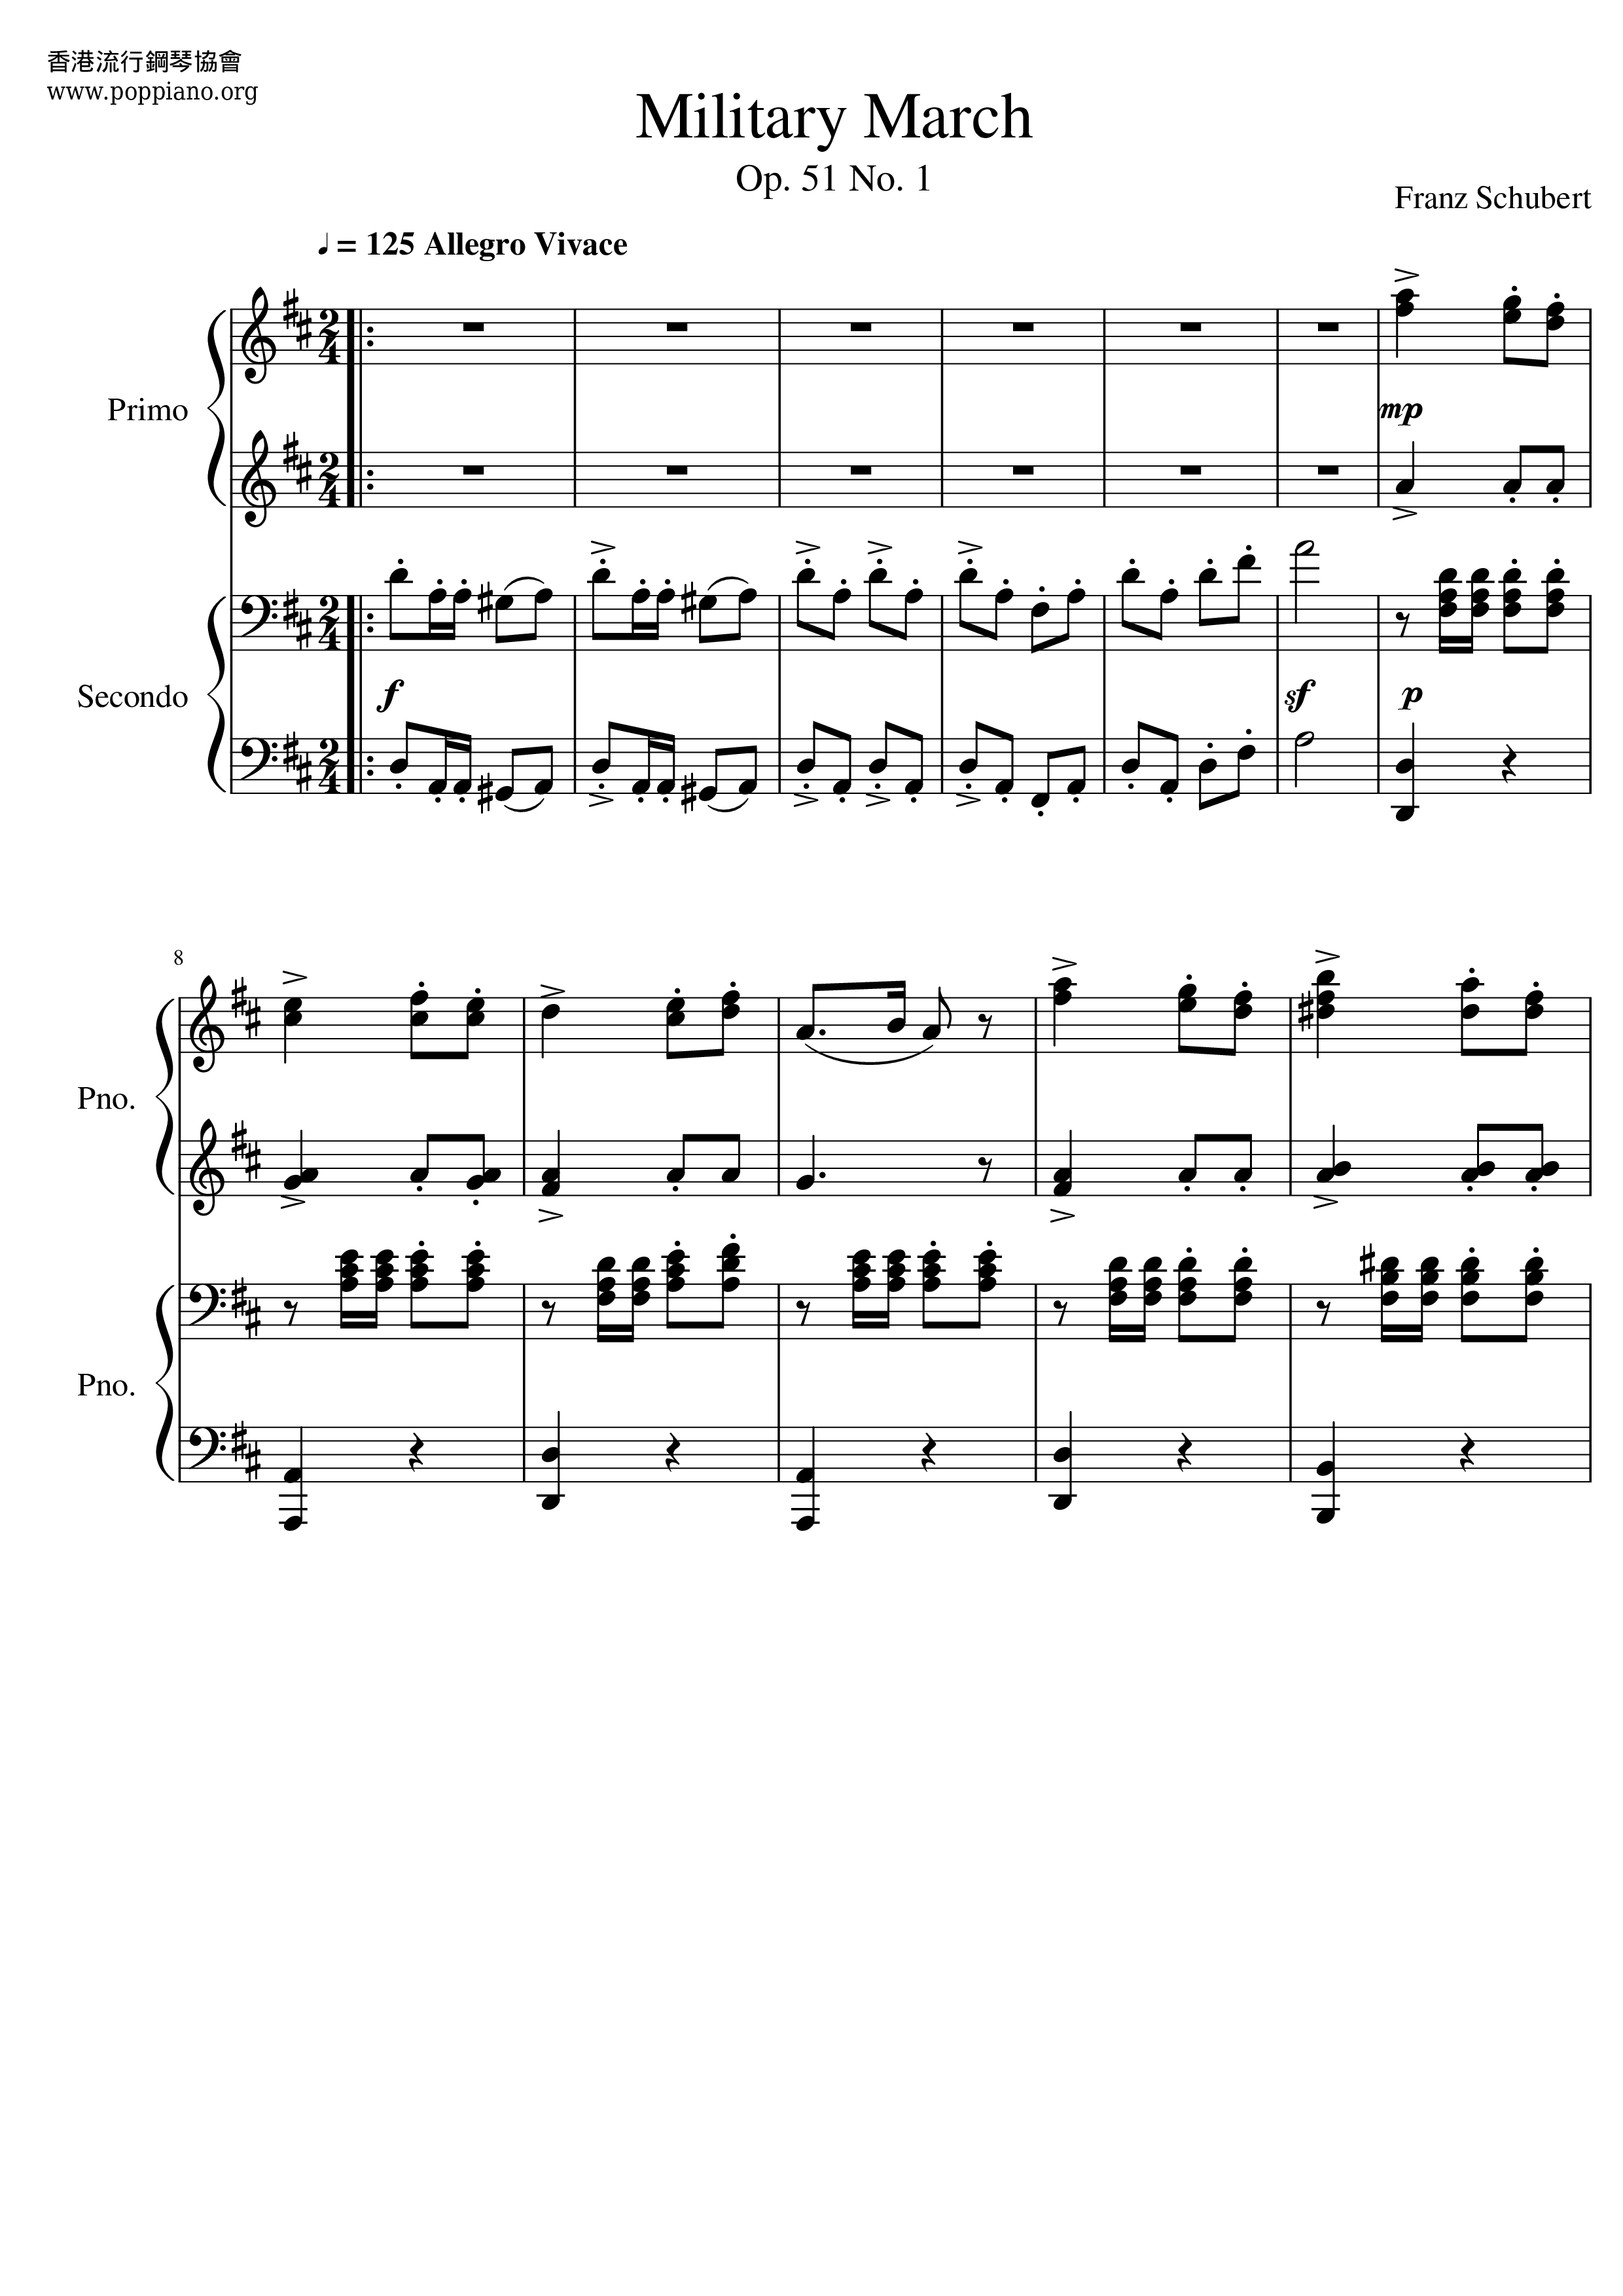 Military March Op.51, No.1 Score